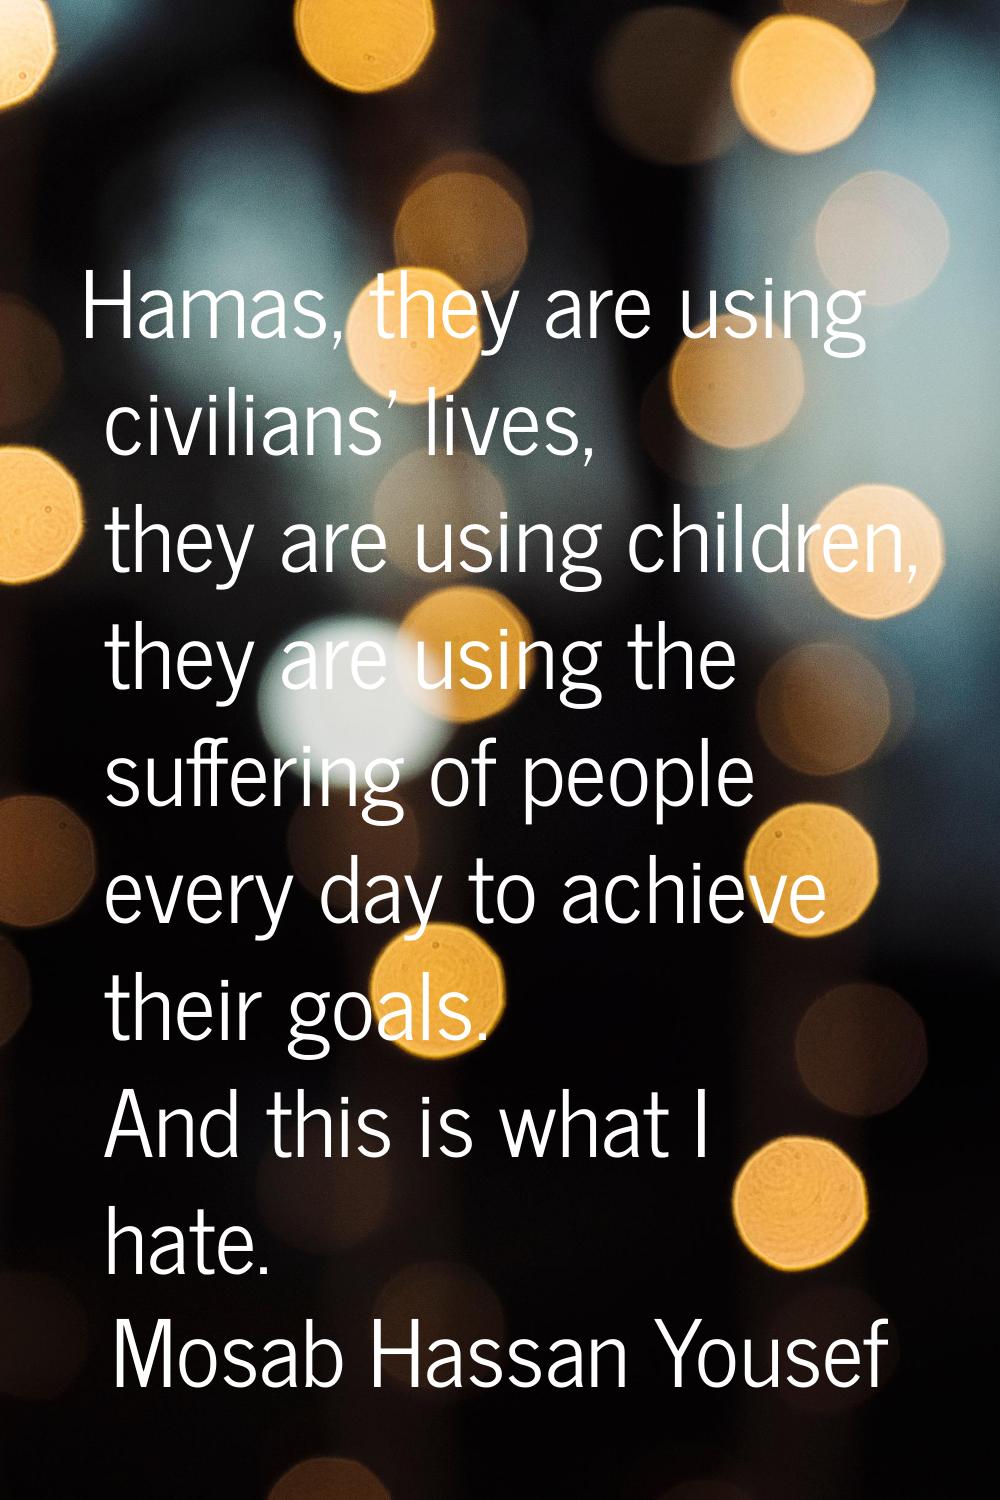 Hamas, they are using civilians' lives, they are using children, they are using the suffering of pe